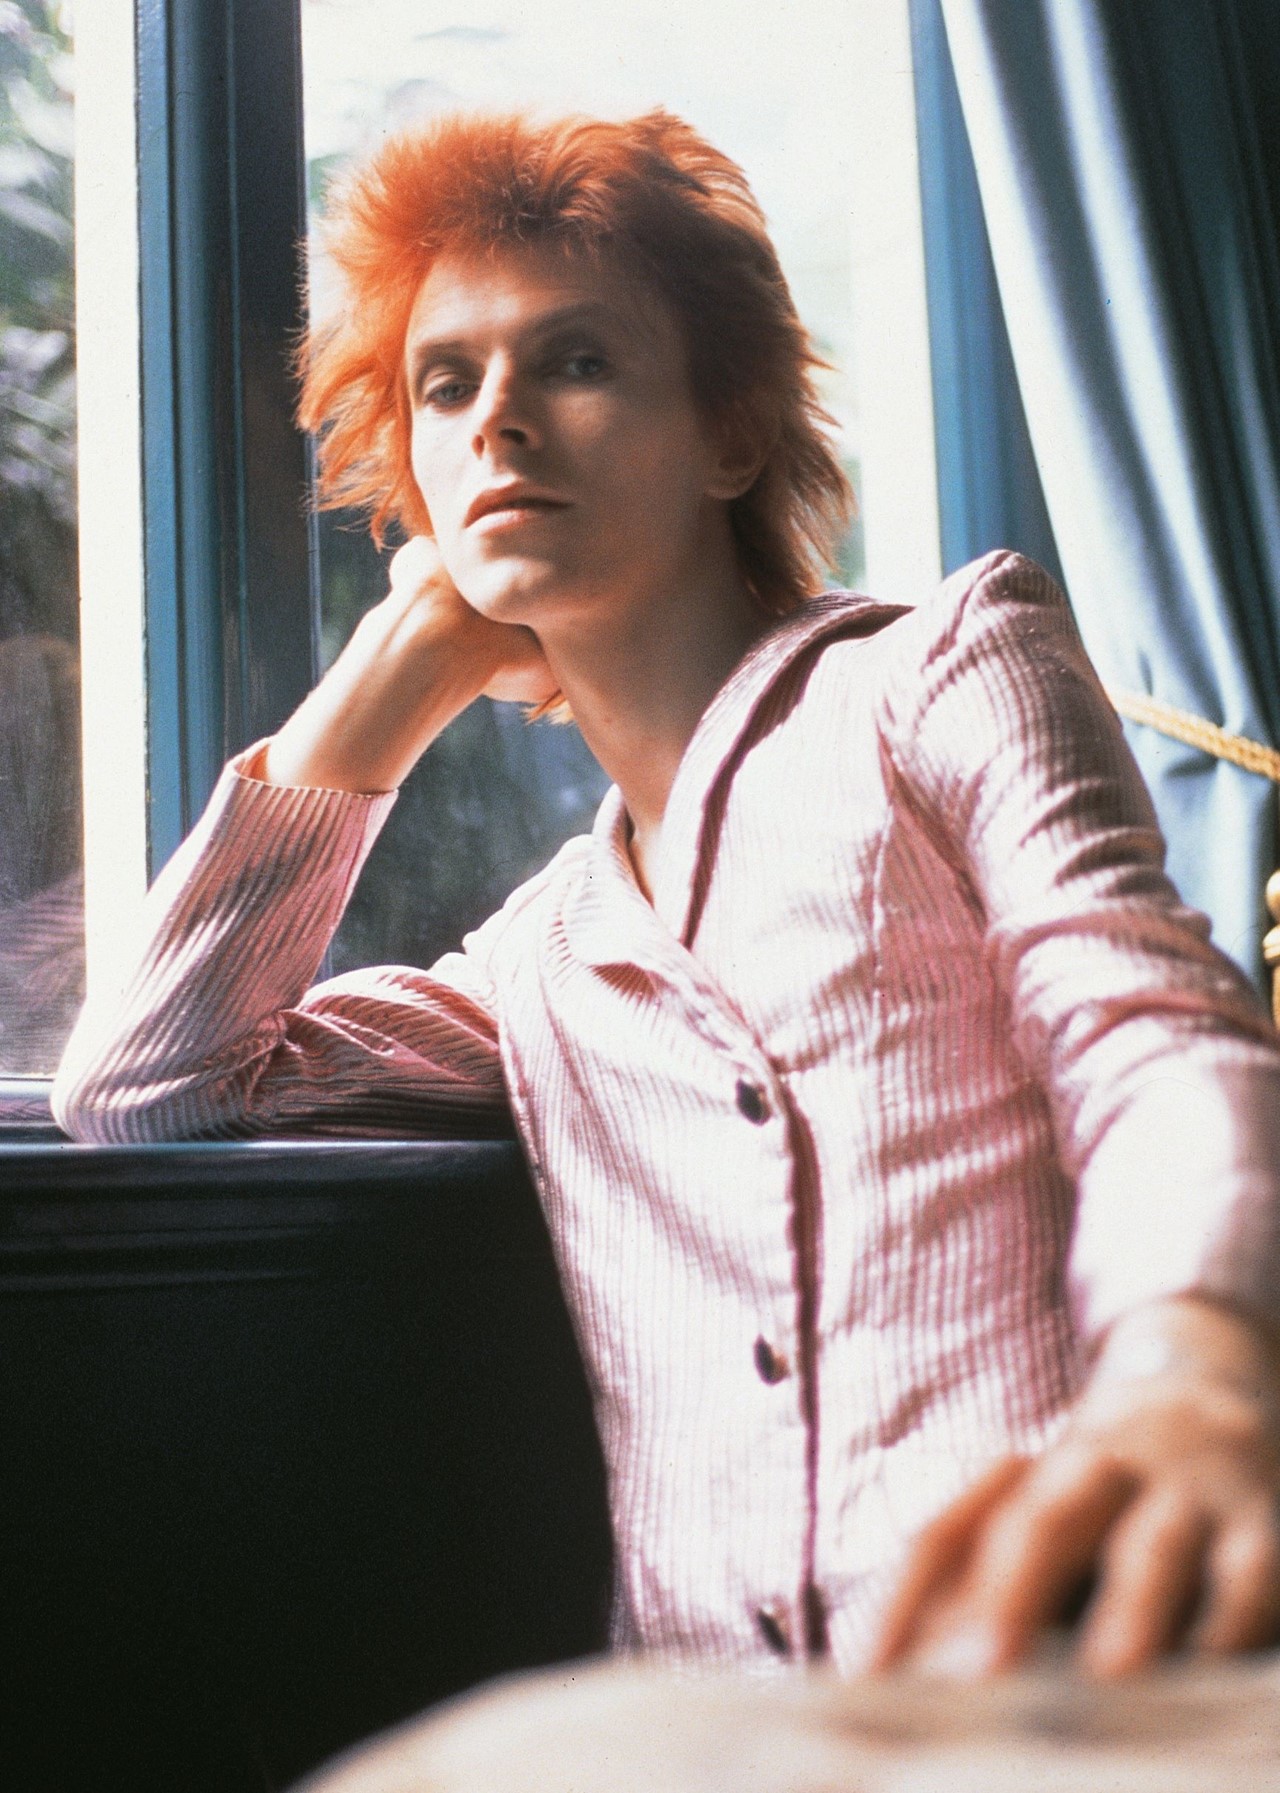 Mick Rocks Photos Chart the Rise and Fall of David Bowies Ziggy Stardust AnOther pic